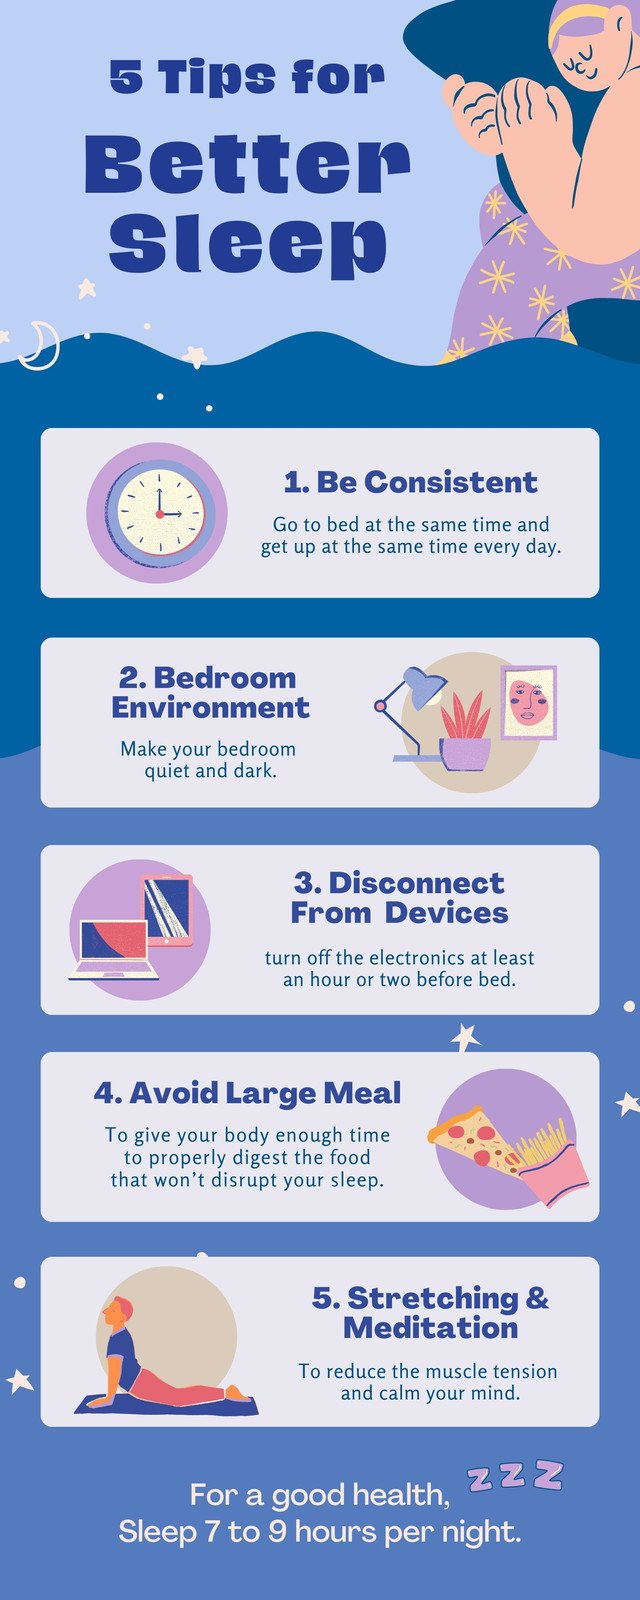 How to sleep better: 9 tips for sleeping through the night